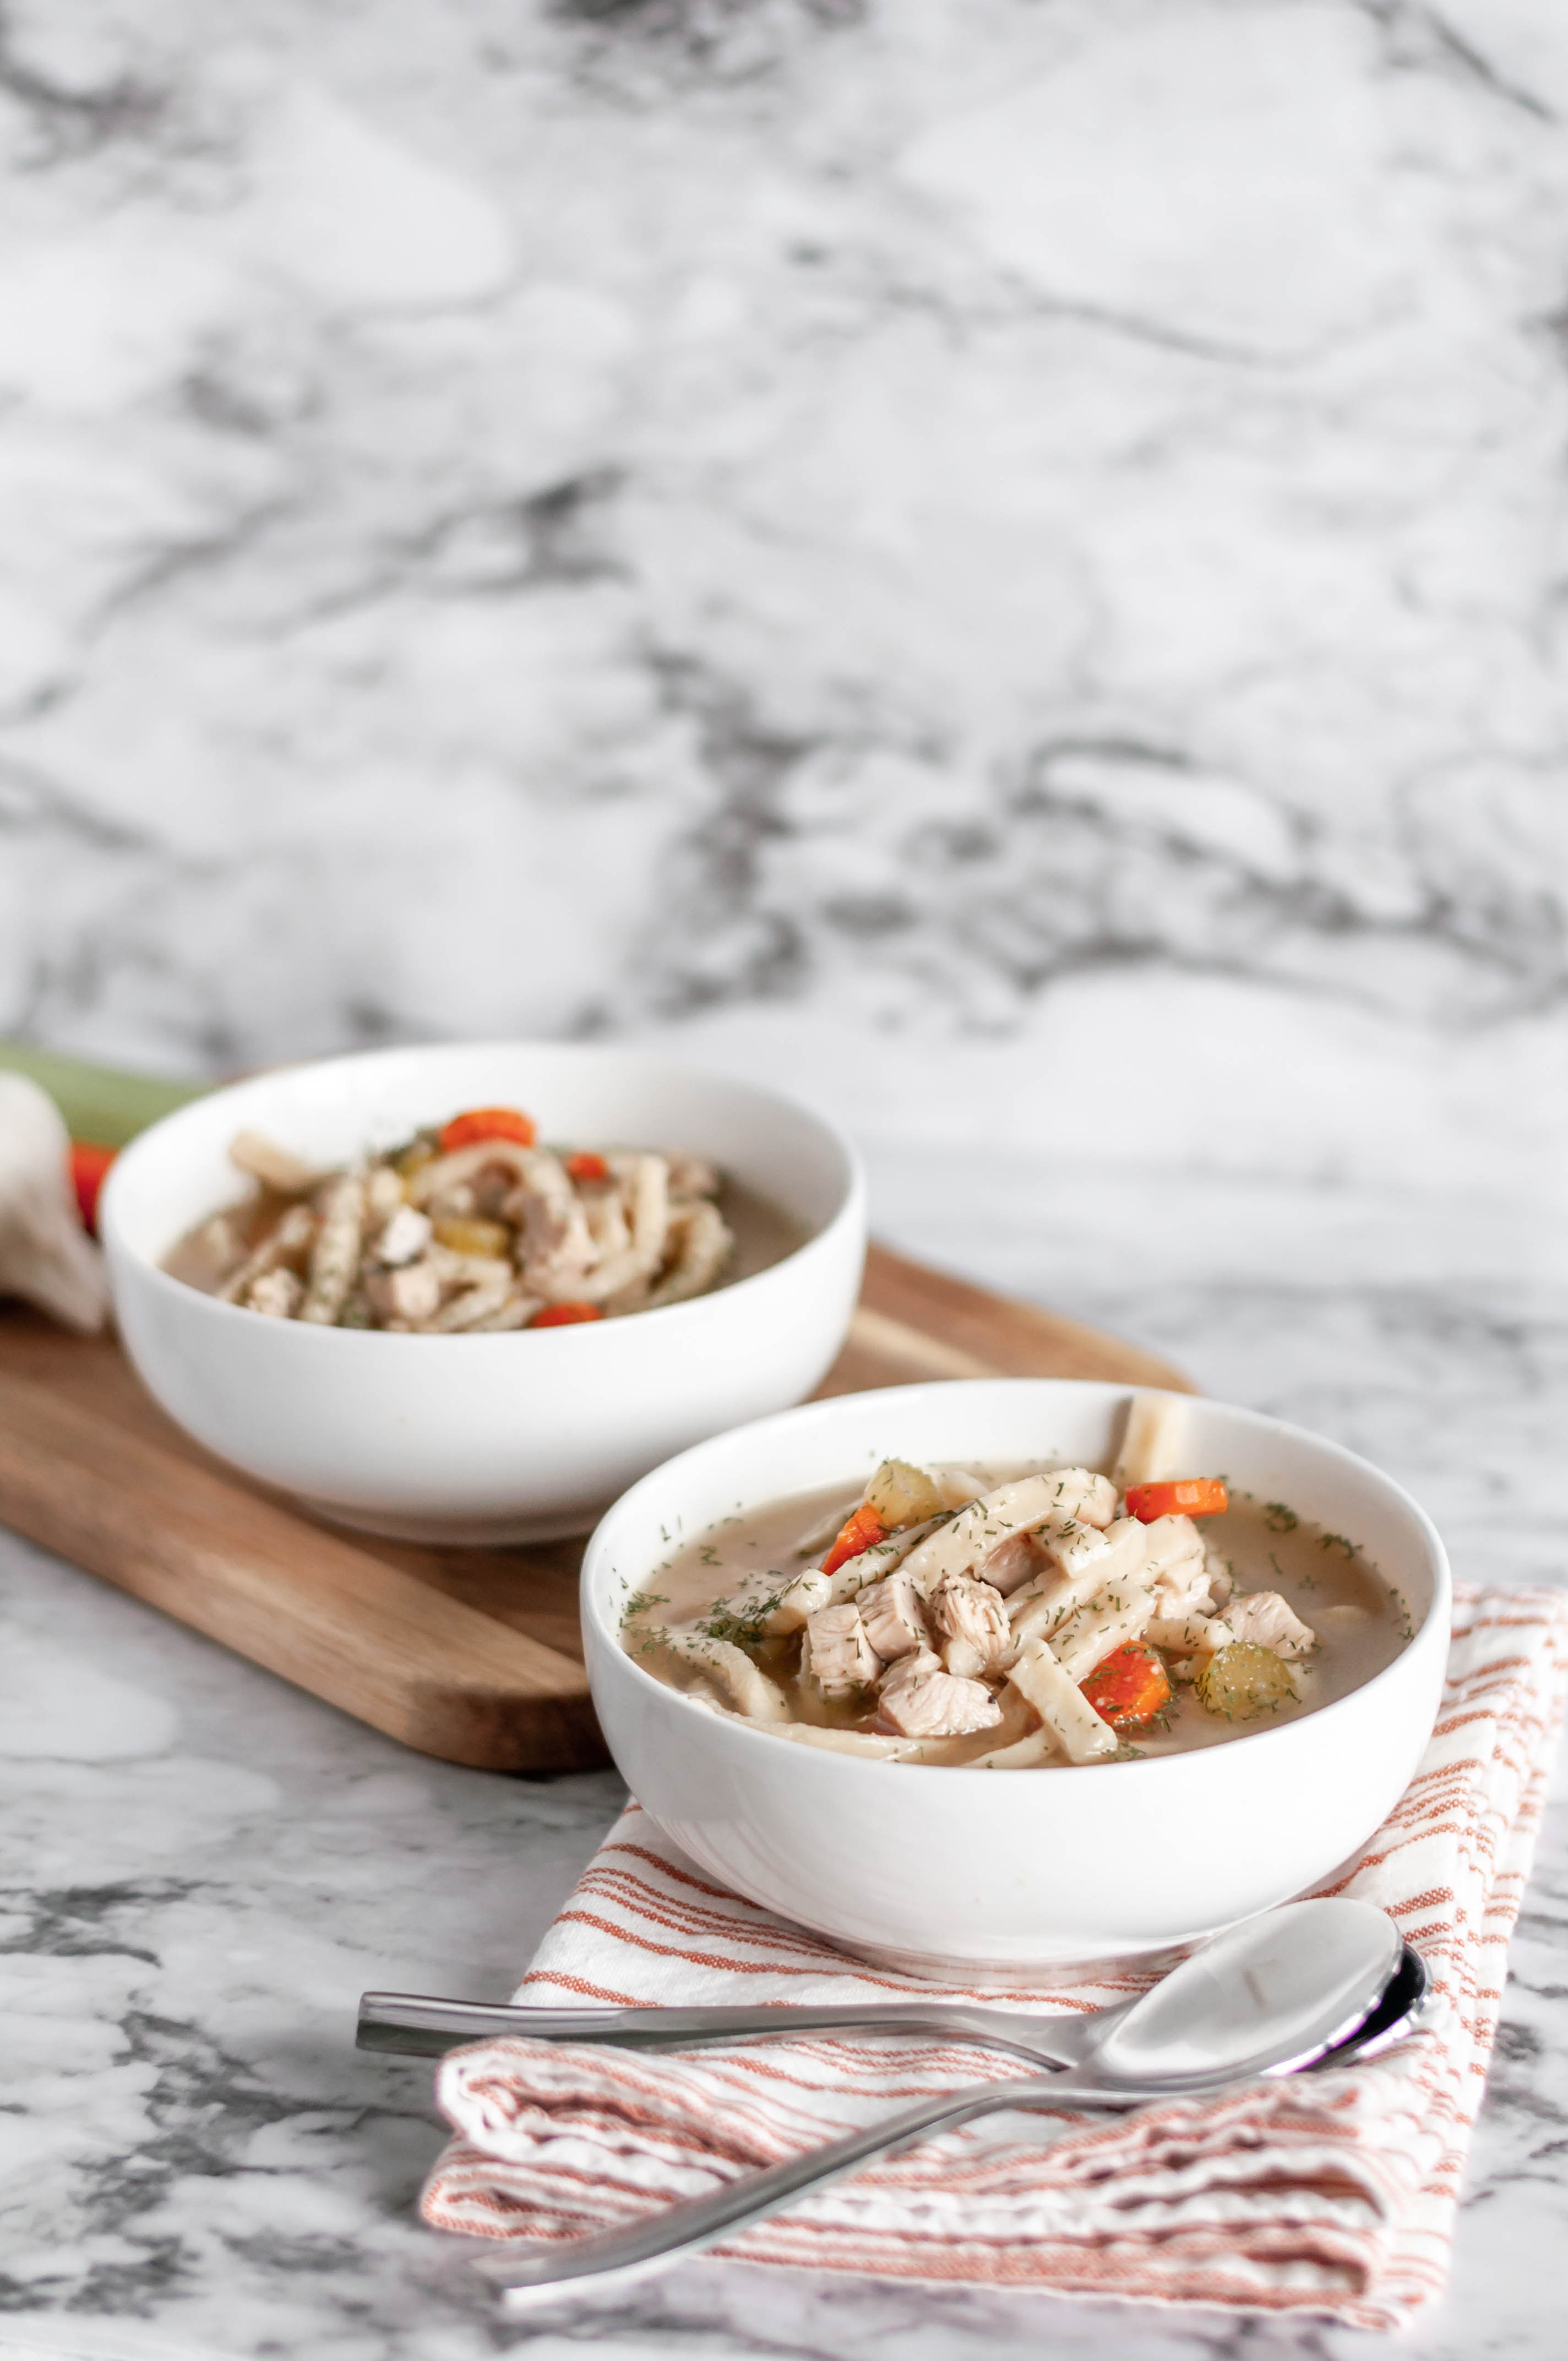 Instant Pot Turkey Noodle Soup uses your leftover turkey from Thanksgiving to make a hearty, flavorful soup in the Instant Pot.